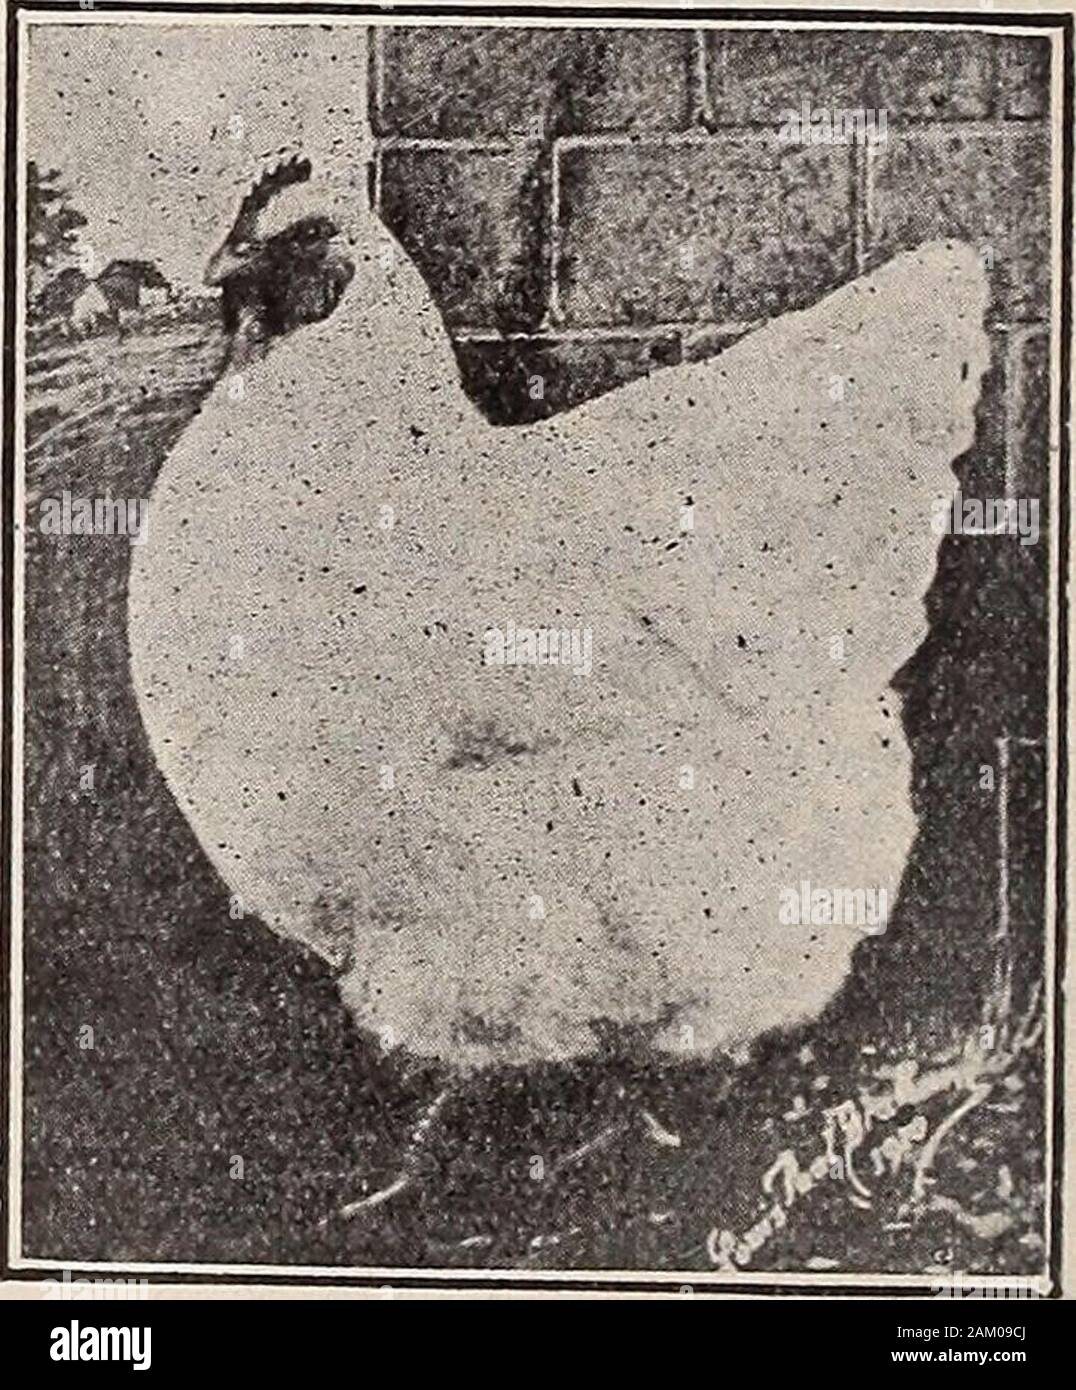 Poultry fancier . Royal Plymouth Rock Columbian Stock for sale at all times from $1.00 to $500.00.Eggs for hatching at all times from $2.50 to $30.00per setting.Send for Catalogue. W00DW0RTH FARM WILTON, CONNECTICUT Exhibition White Orpingtons Winners at Madison Square Garden, Grand Central Palace, N. Y., Philadelphia, St. Louis and Missouri State Shows. Can supply Birds to Win at any show in America at Reasonable prices. Also choice utitity trios, early hatched at S12.00 andS1S.00, and pens at S20.00 and S25.00. These birdshave size, heavy bone, srood head points, nice shape,are splendid laye Stock Photo